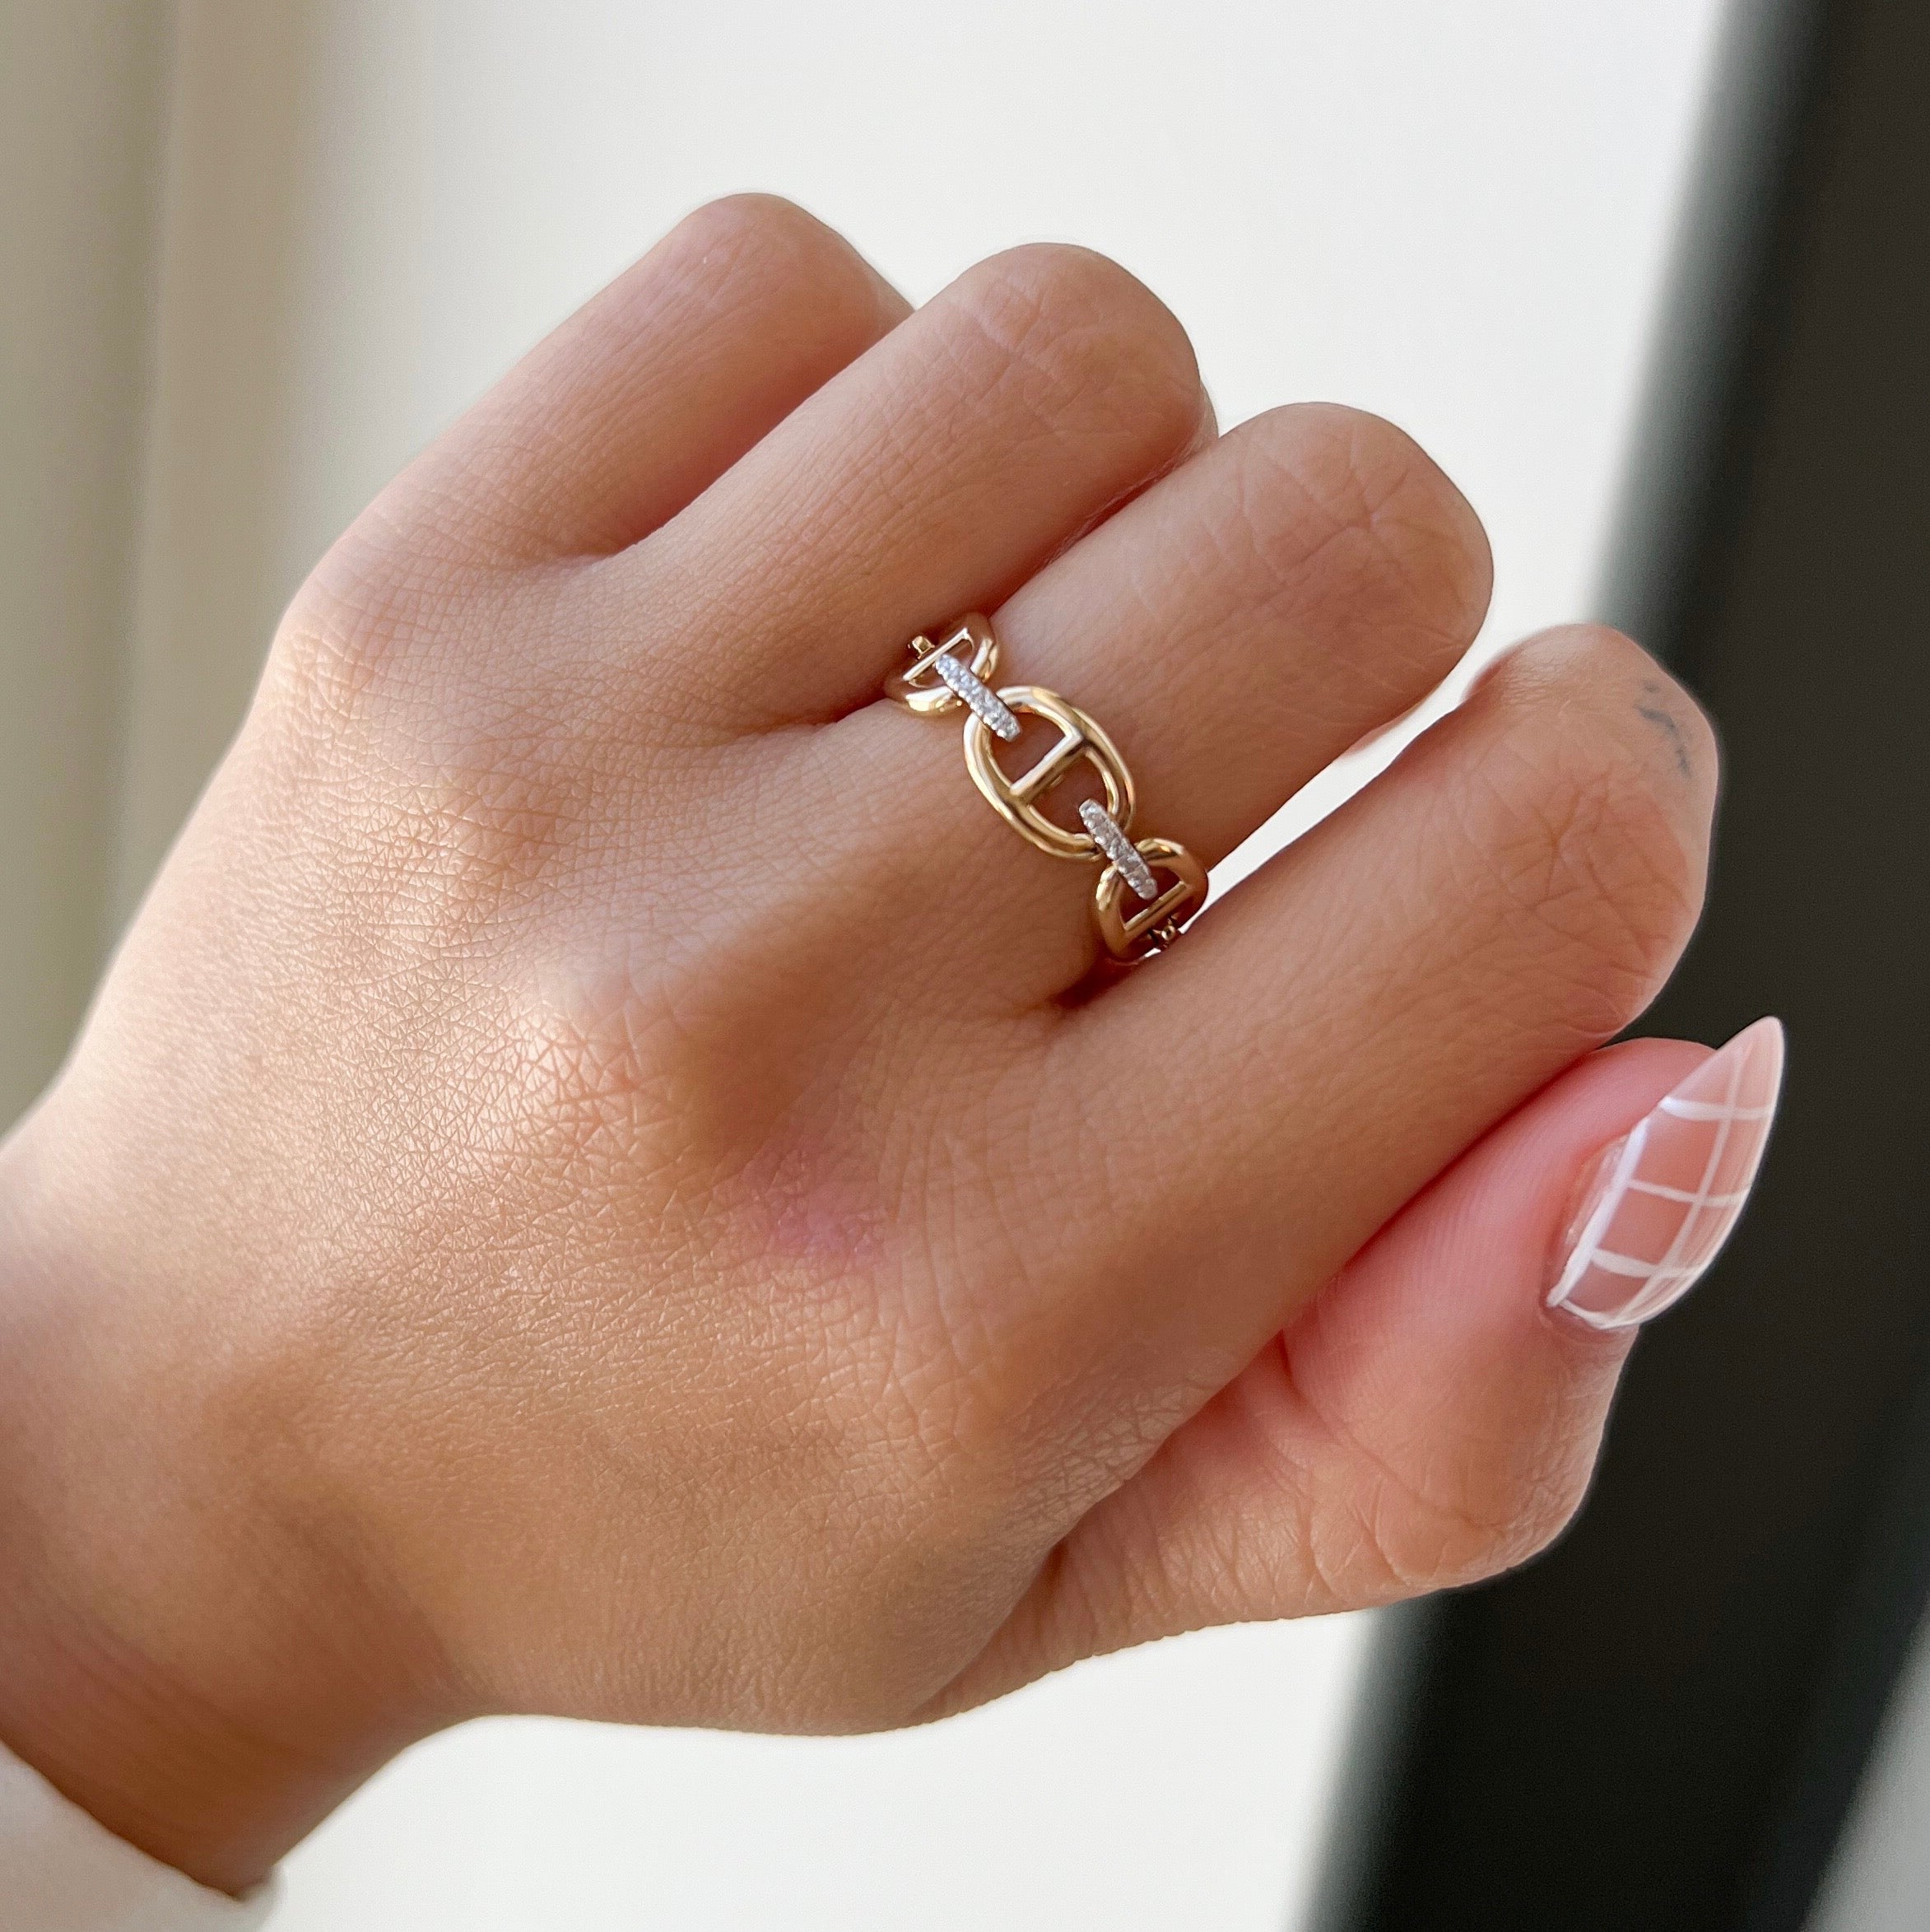 Diamond And Gold Moveable Link Ring